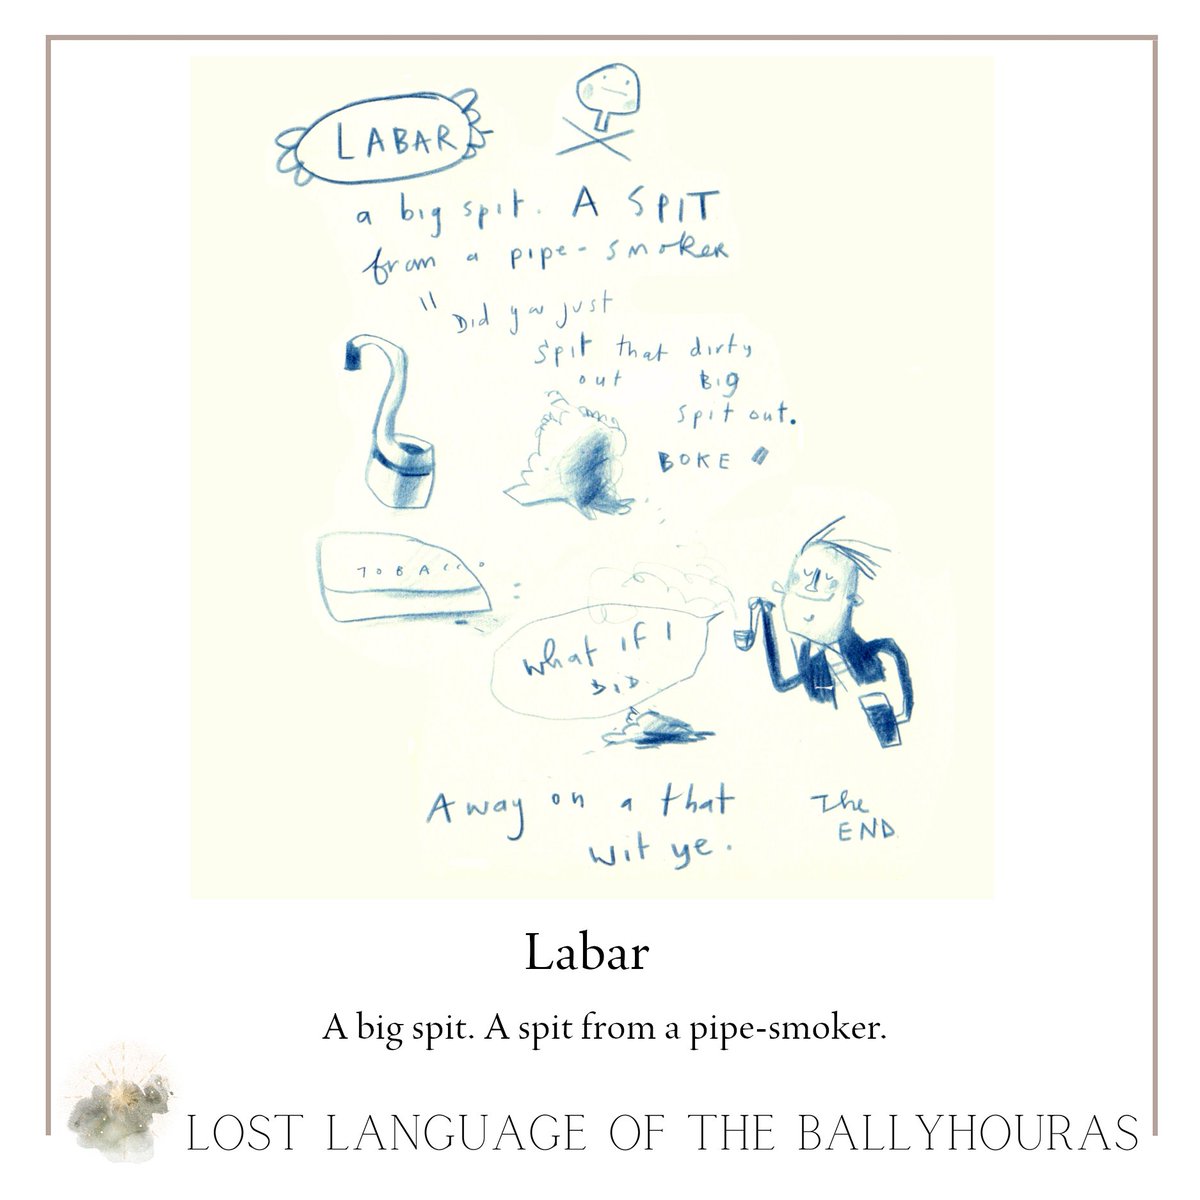 LABAR A big spit. A spit from a pipe-smoker. Illustration: @corrinaaskin Words from the book The Lost Language of the Ballyhouras: Cnuasach Focal Paddy Fennessy, edited by Evelyn Fennessy and Róisín Ní Ghairbhí. Purchase from: evelynfennessy@gmail.com or @ansiopaleabhar